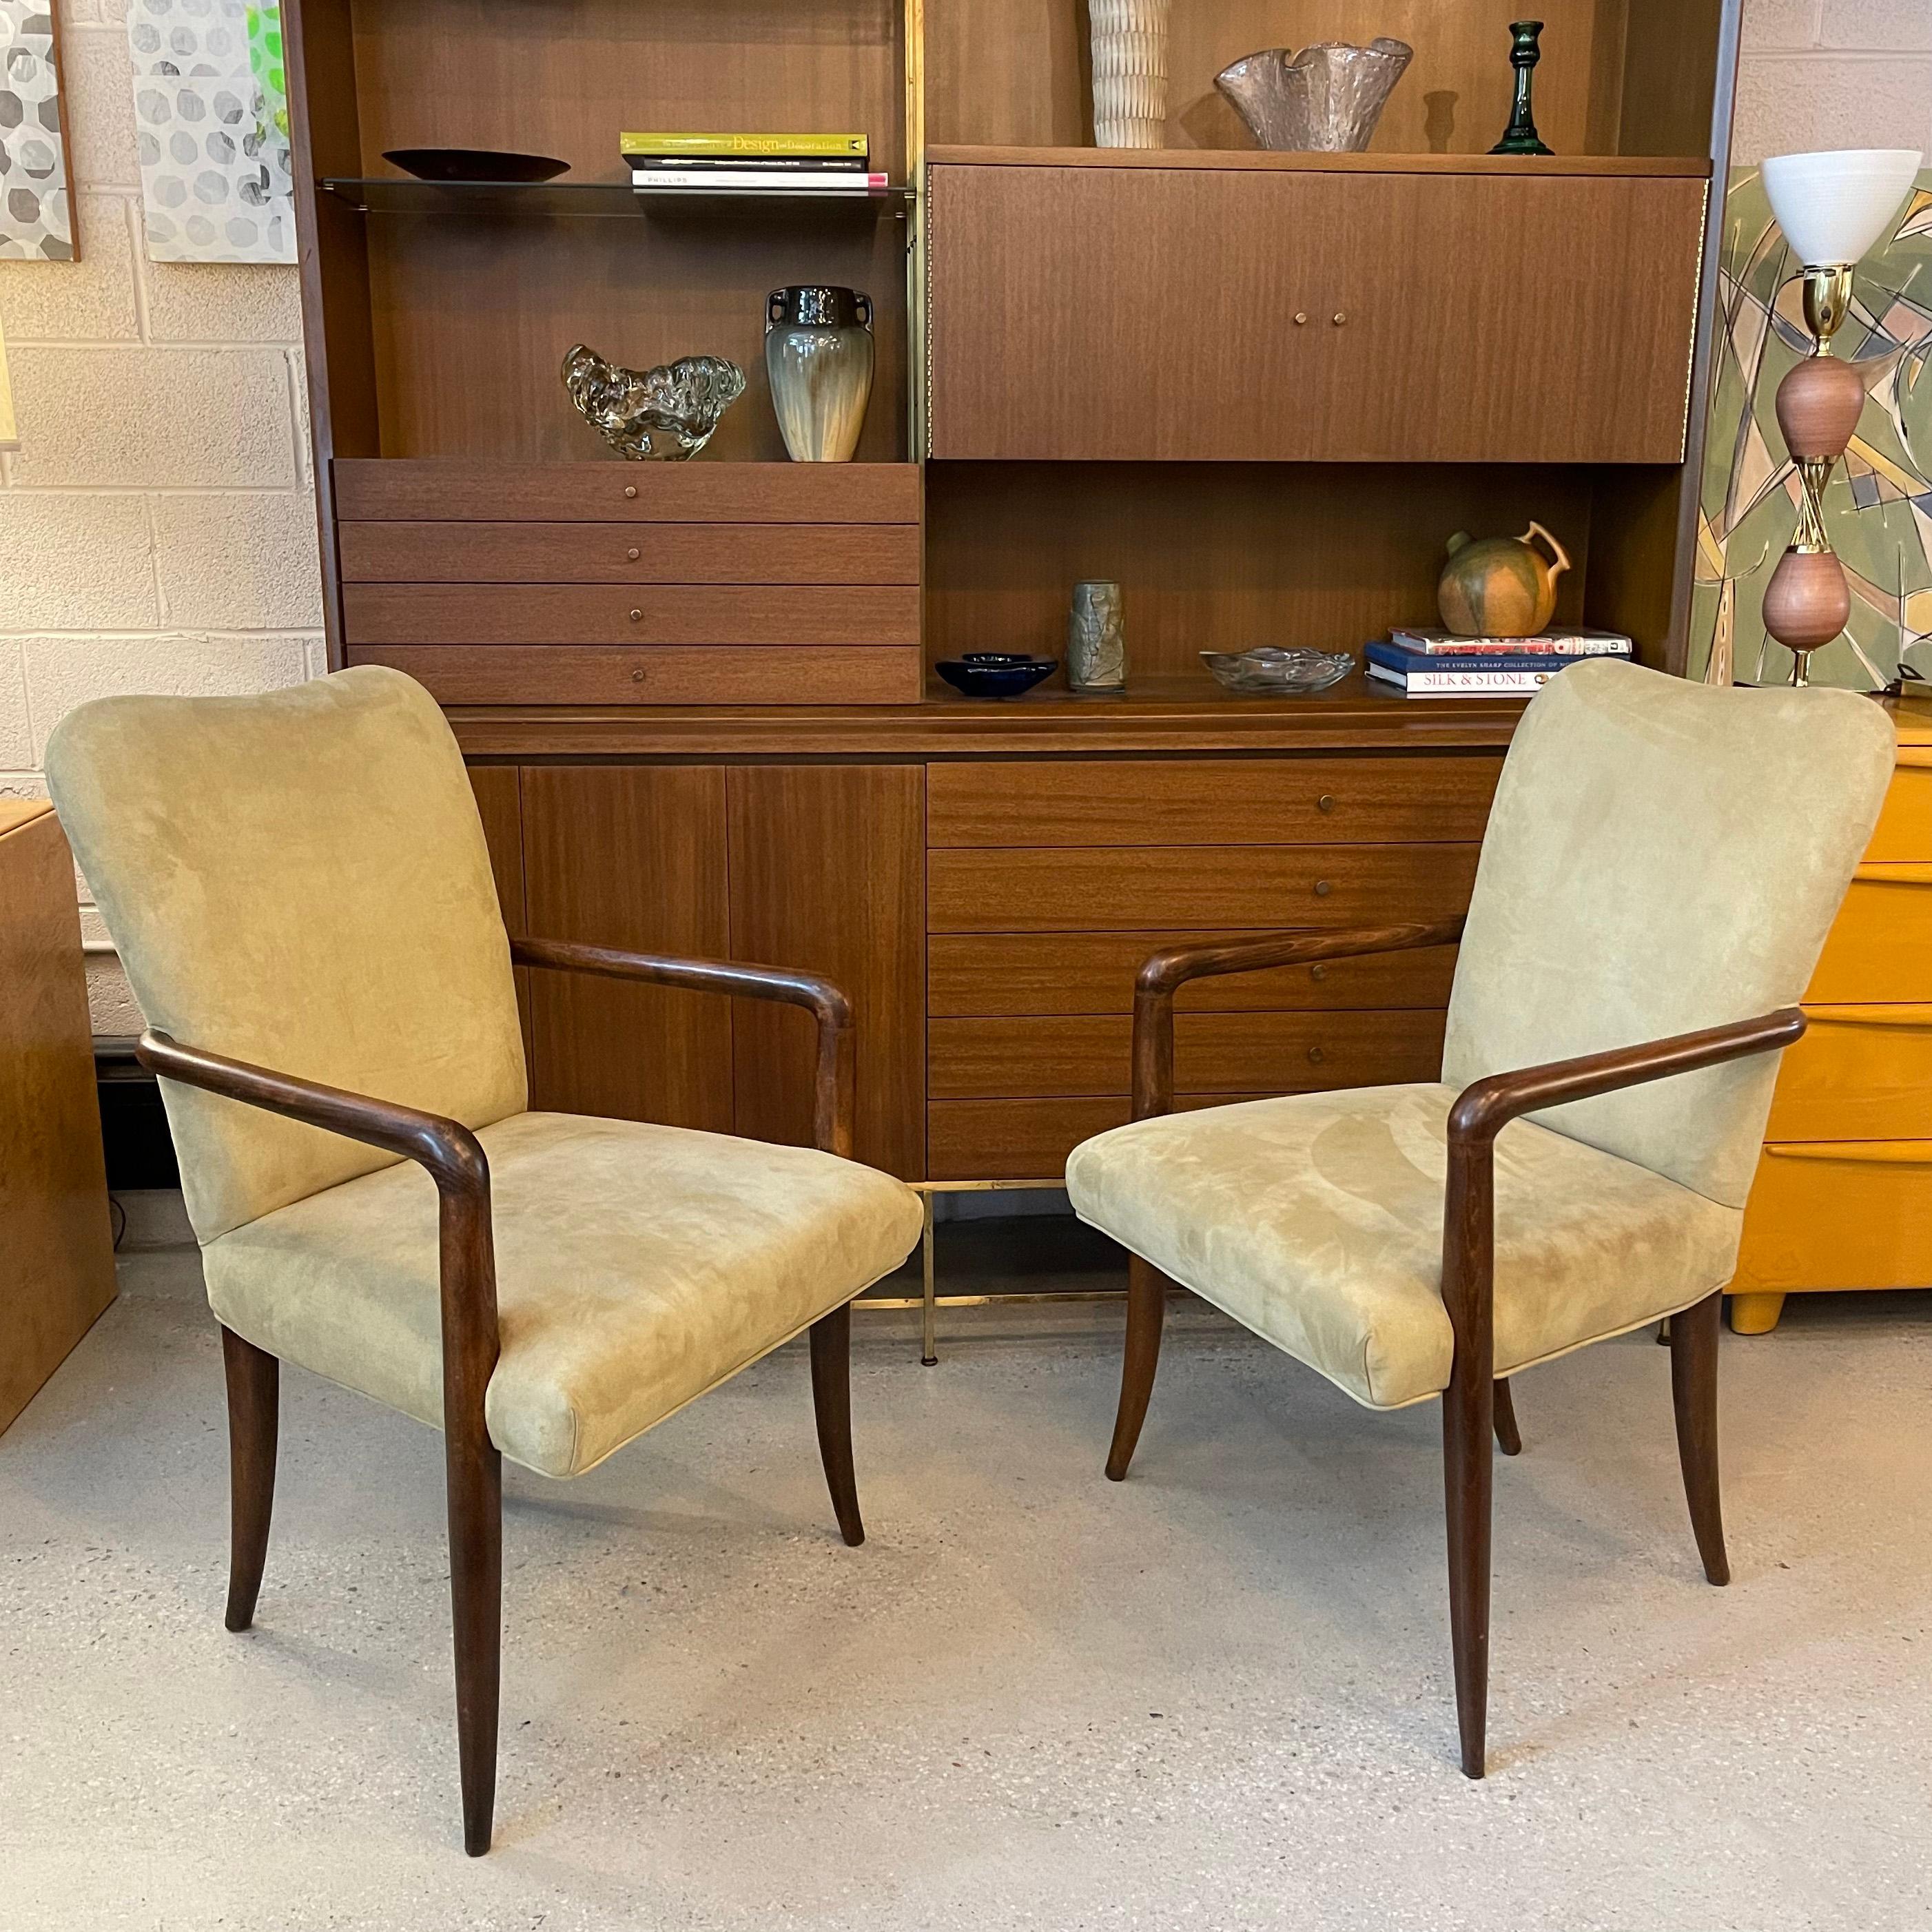 Pair Of Mid-Century Modern UltraSuede And Oak Sabre Leg Armchairs In Good Condition For Sale In Brooklyn, NY